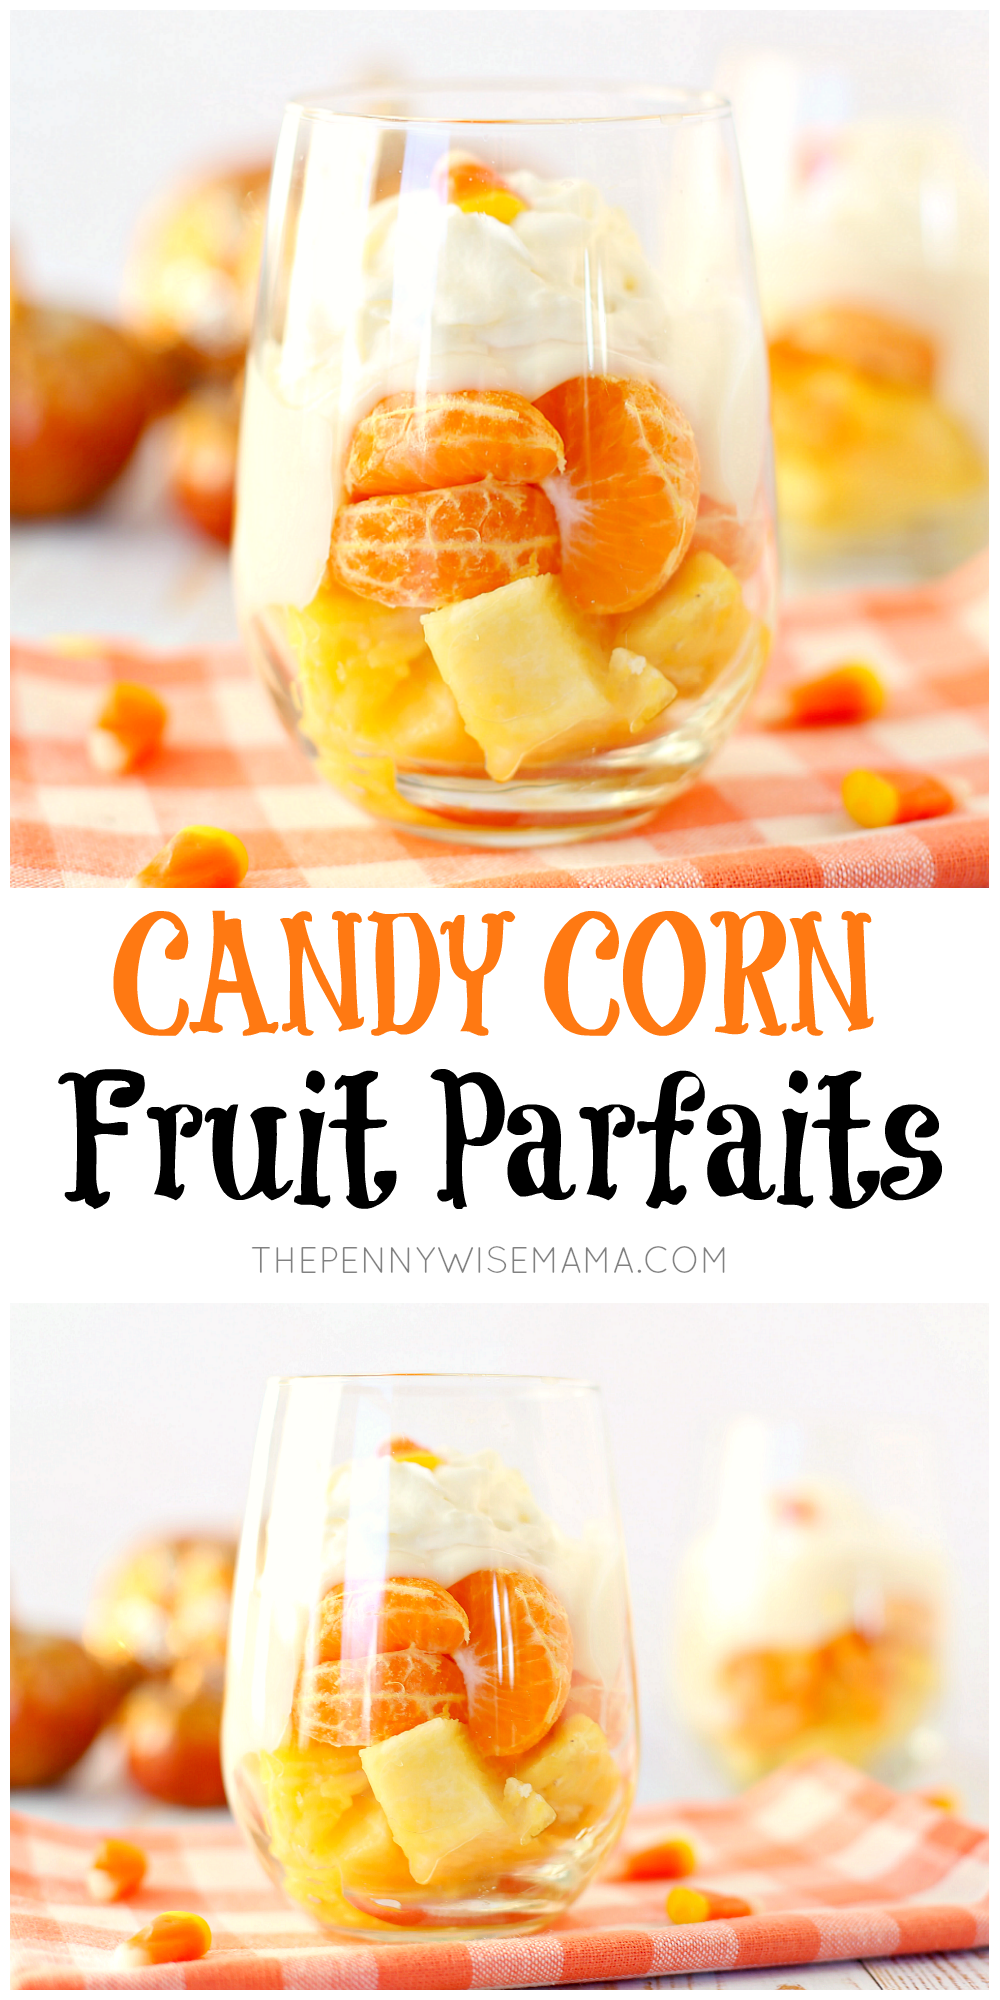 Healthy 'Candy Corn' Fruit Parfaits - a yummy, tooth-friendly treat!